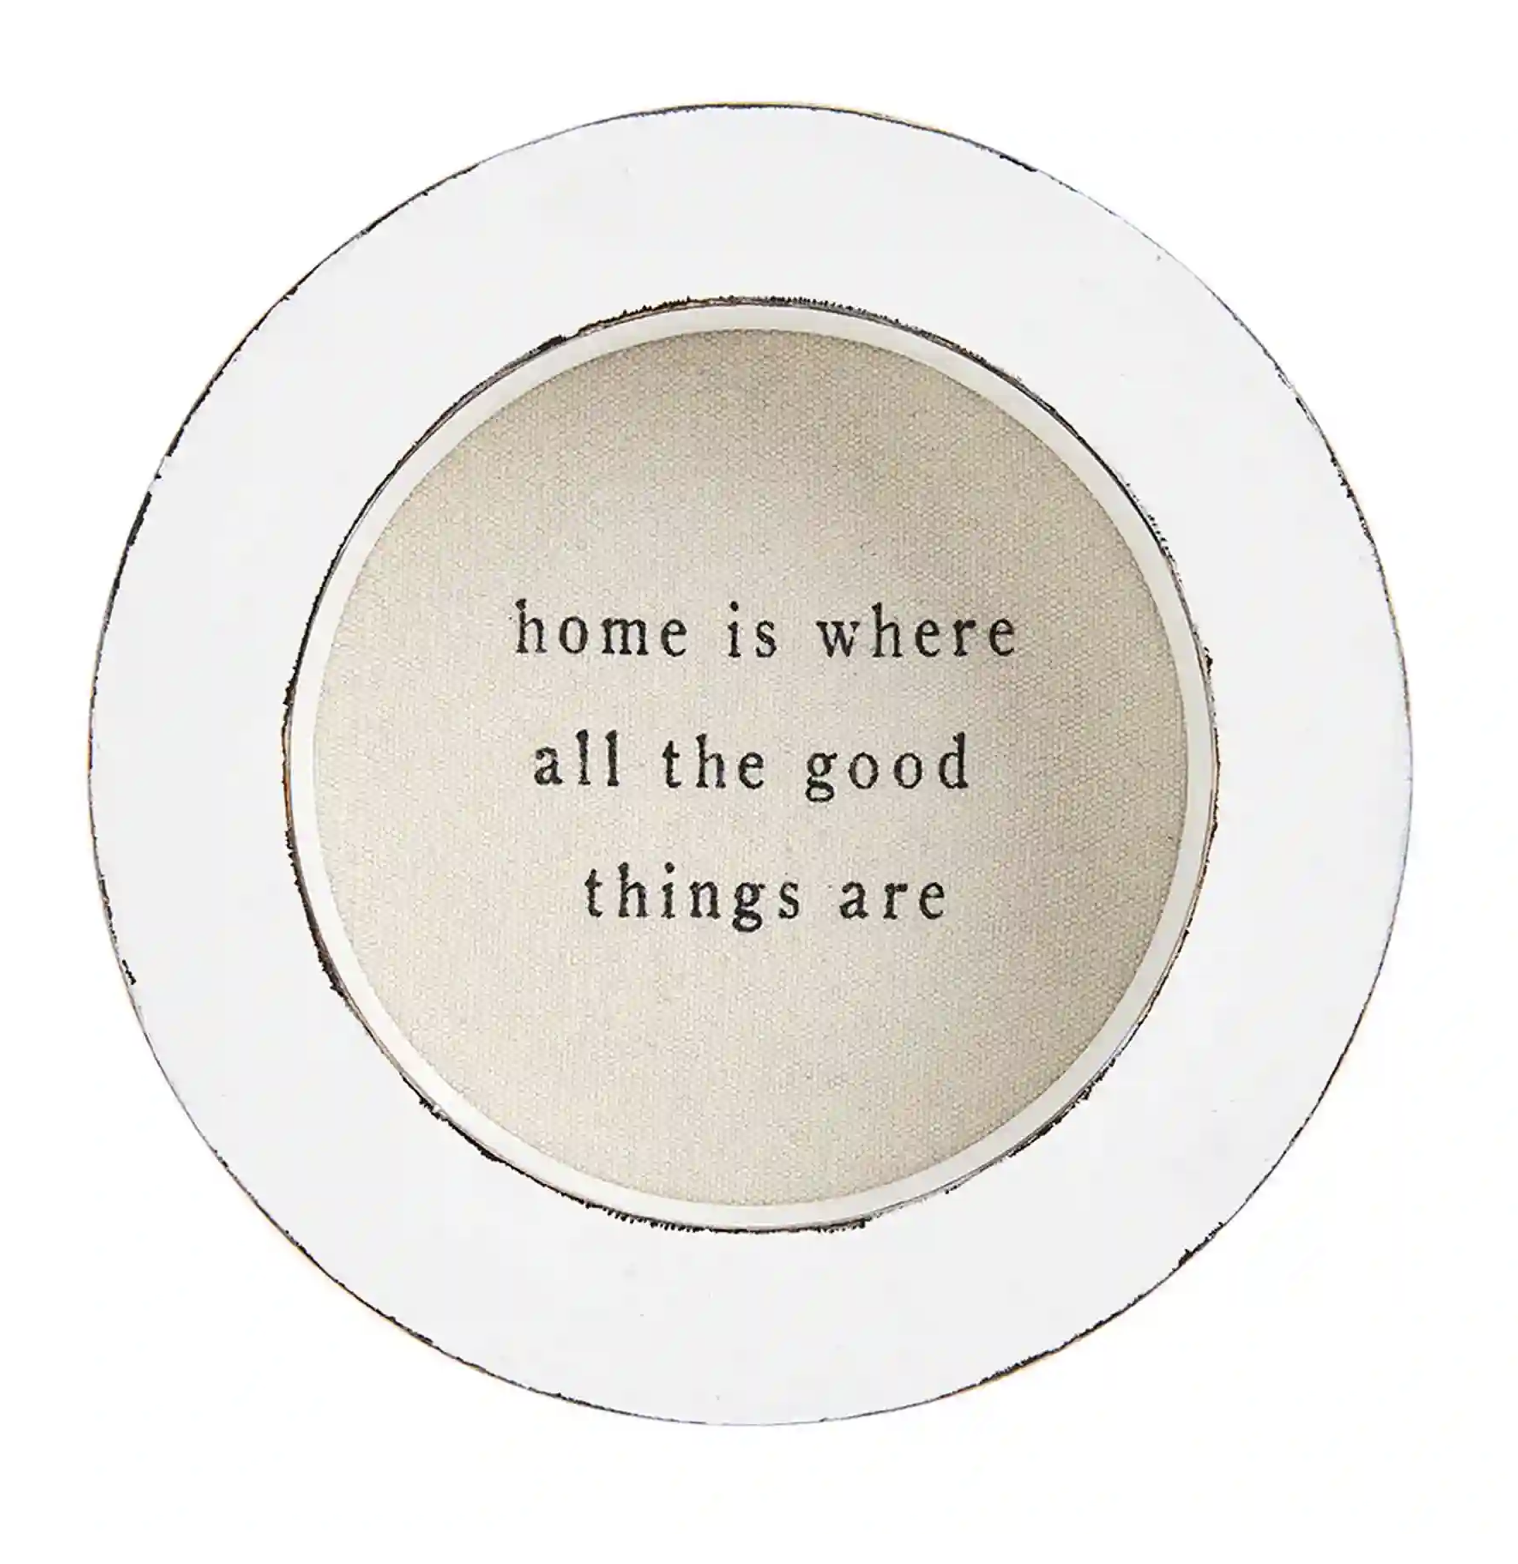 Home is Where Circle Plaque